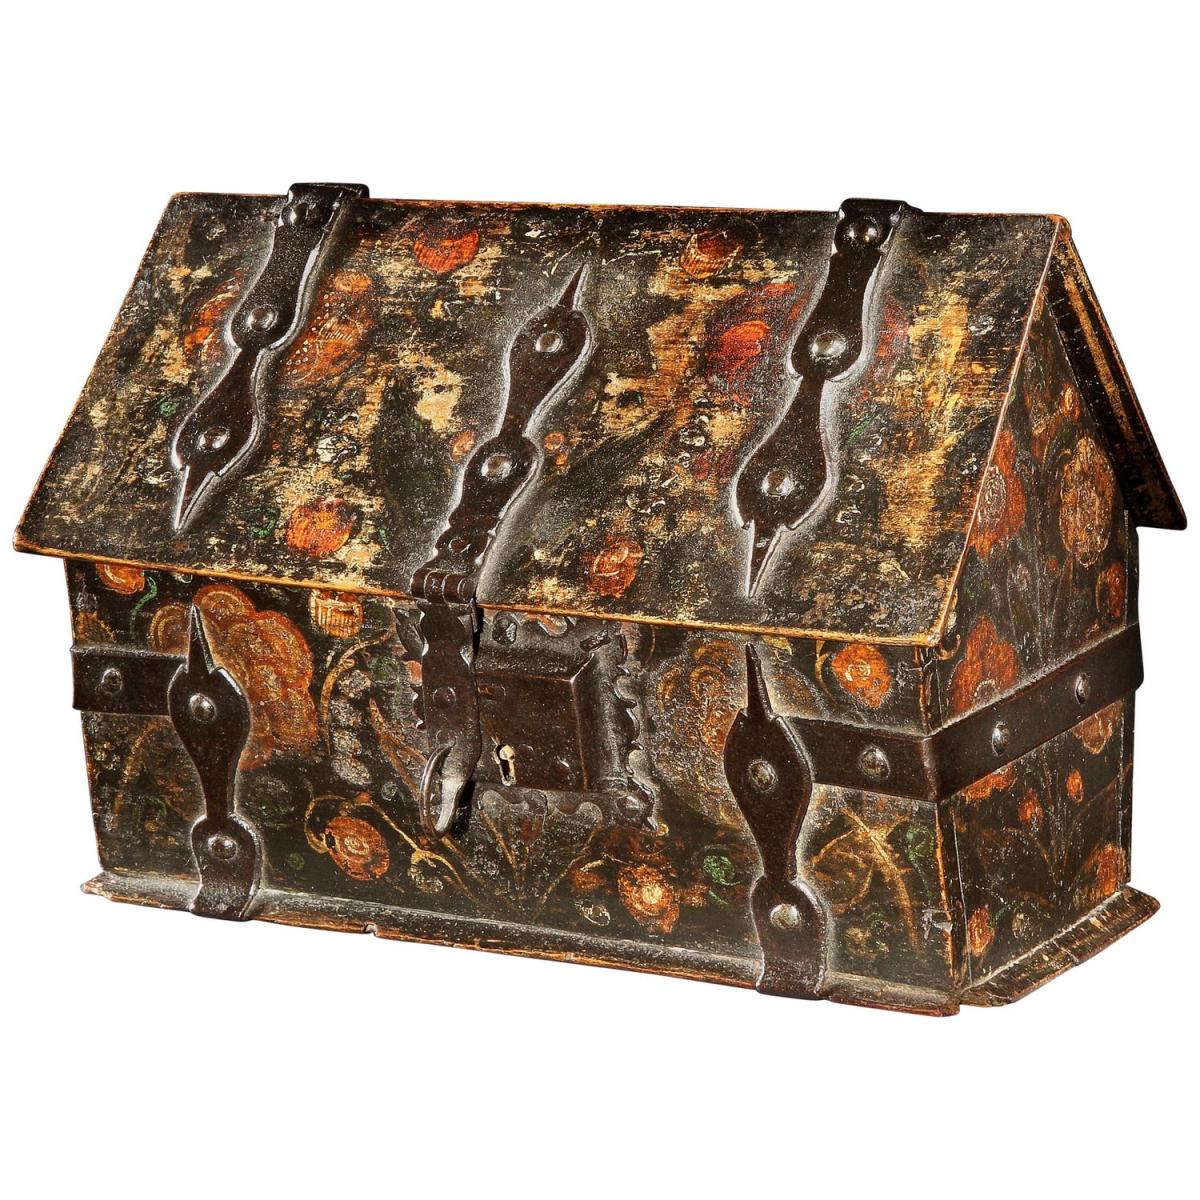 A mid-17th century, Swiss or German, polychrome casket from the Vivien Leigh Collection